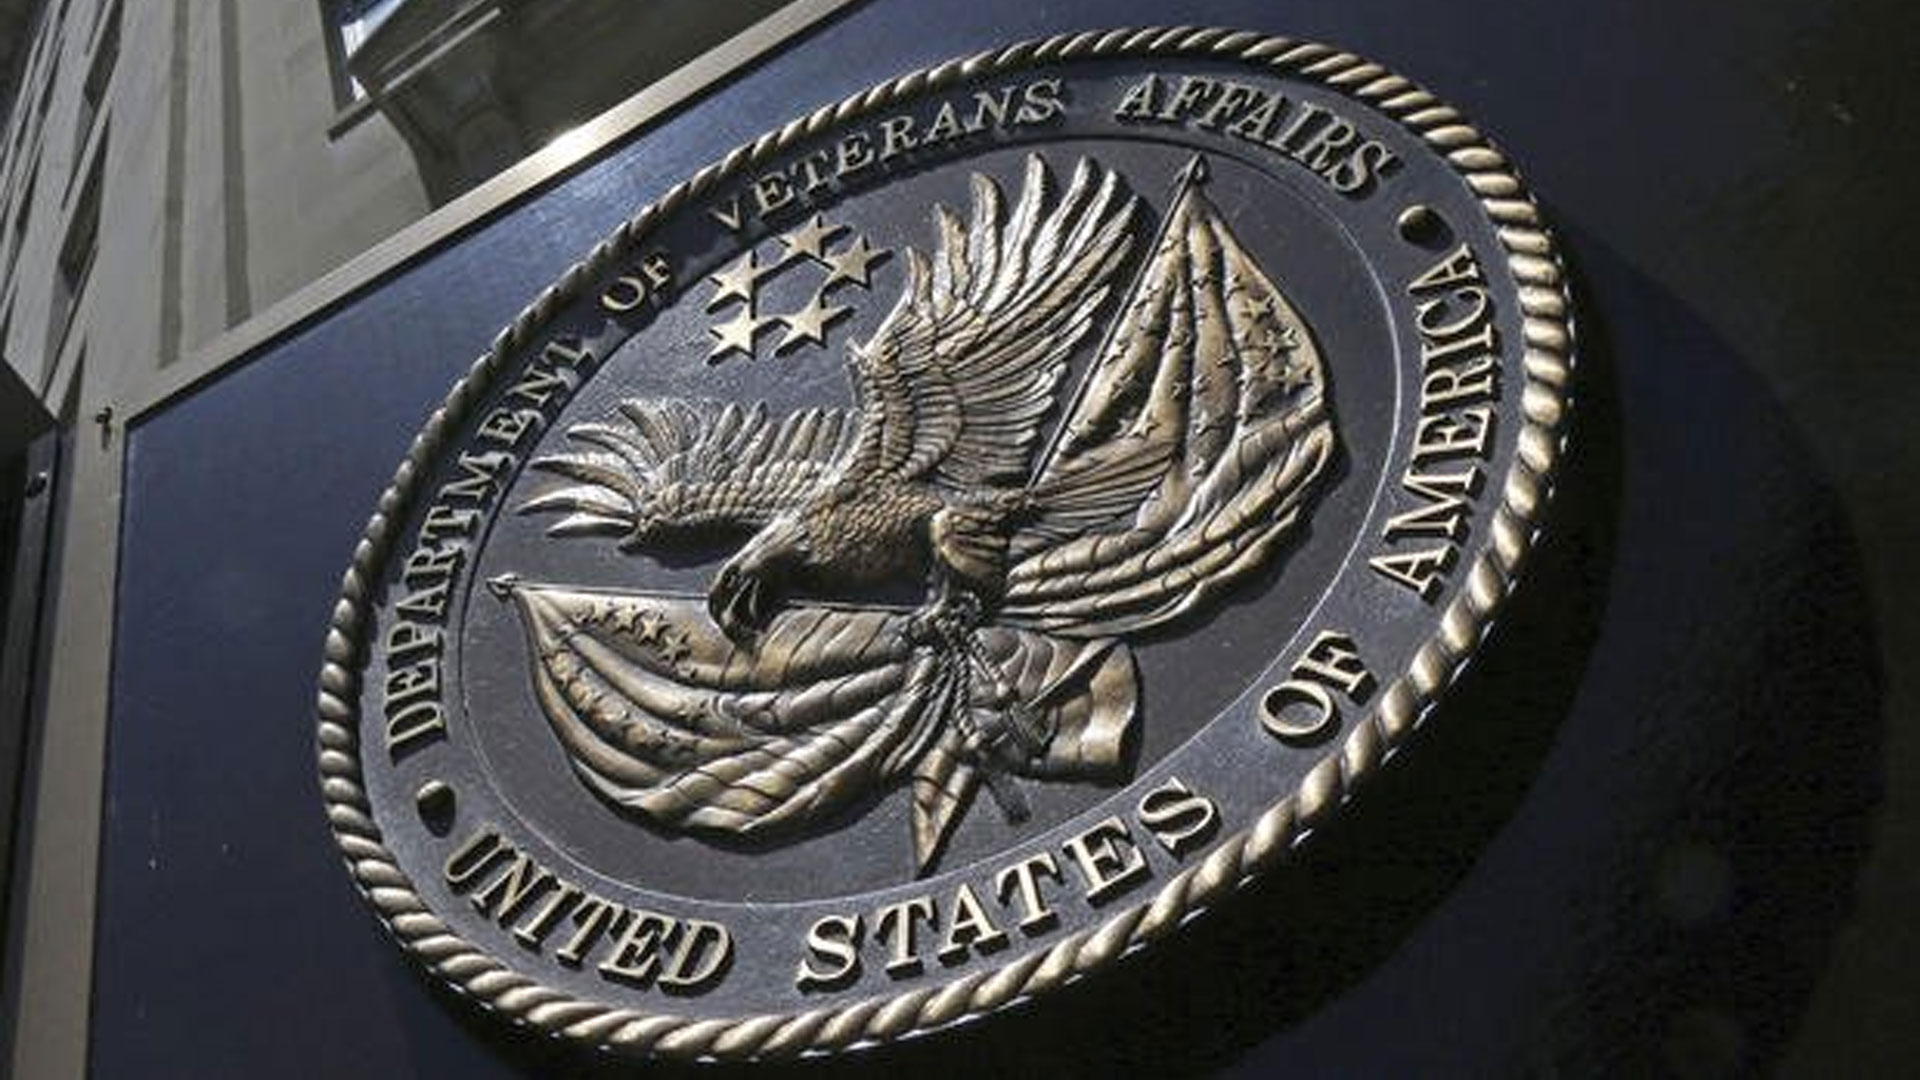 Veterans Experiencing Technical Hurdles with PACT Act Filings...